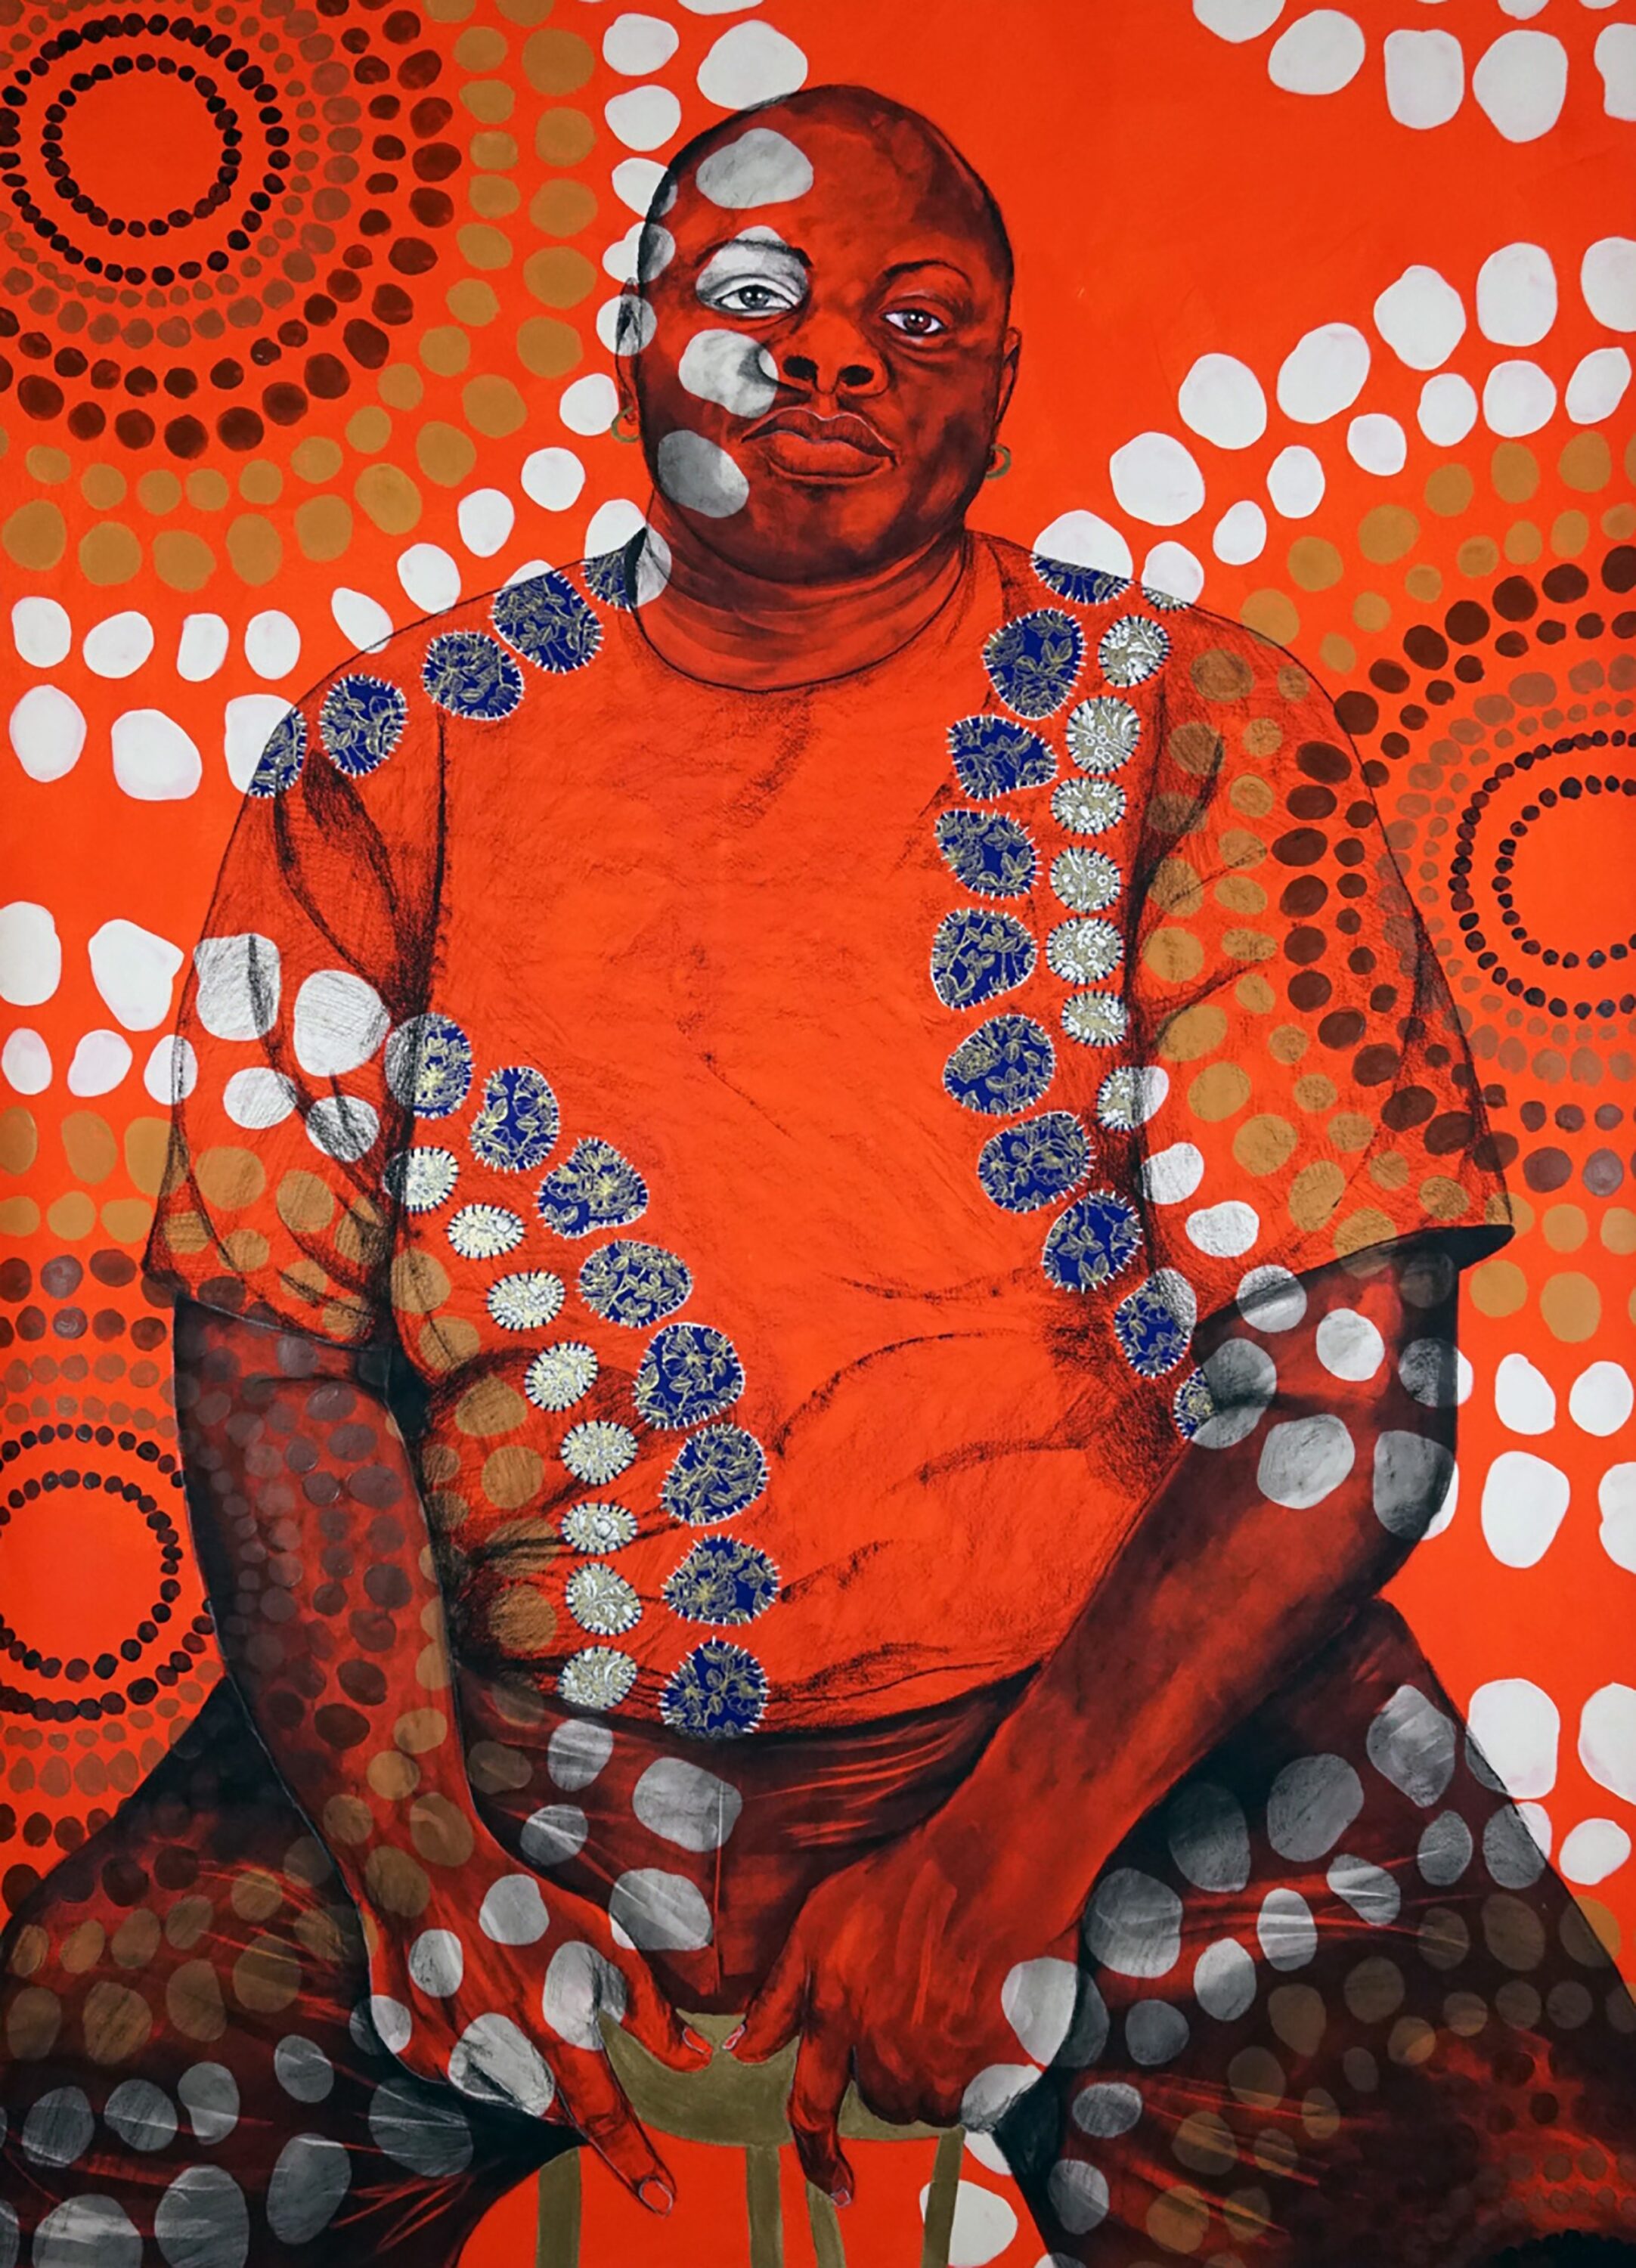 In this mixed-media painting, awash in bright orange, a seated, heavy-set, dark-skinned man stares confidently at the viewer. An overlaid pattern of white, blue, and brown circles covers him and the background.